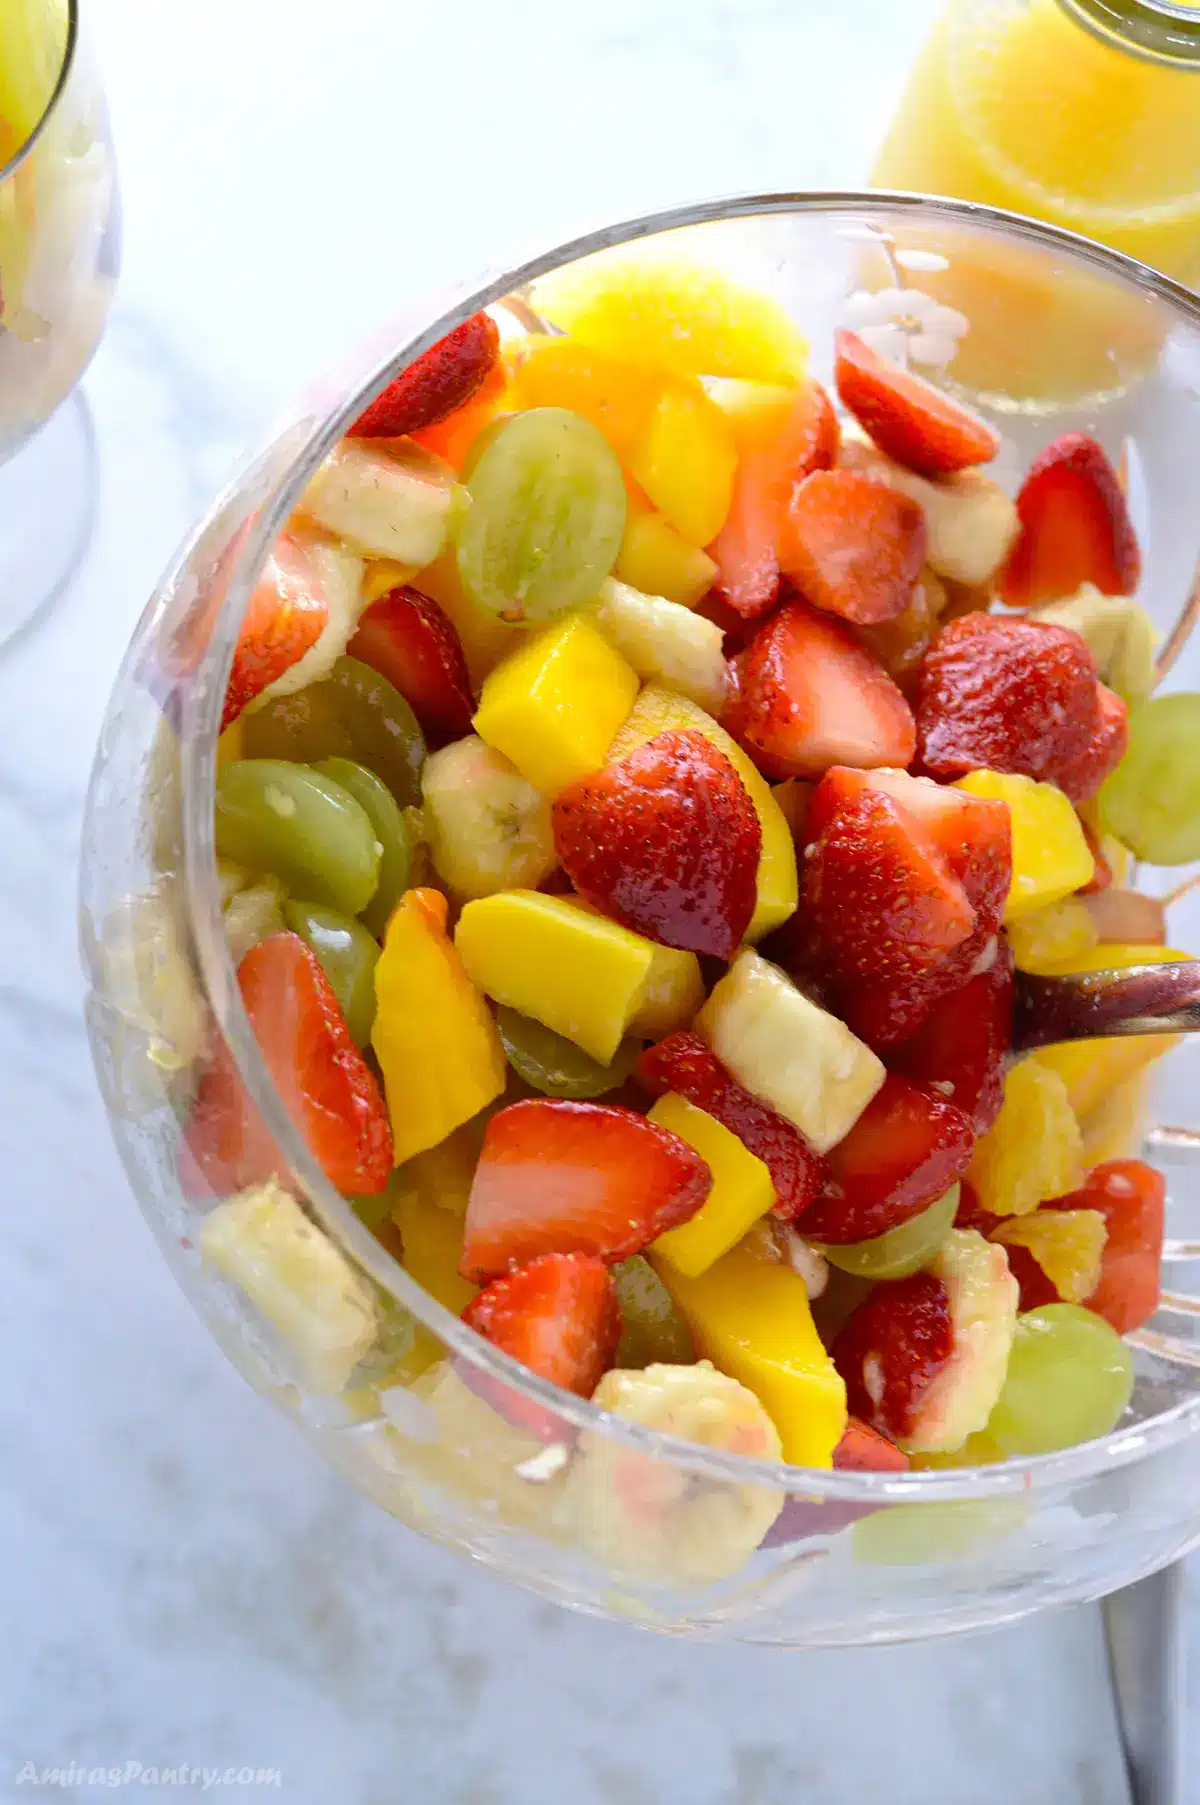 A top view of a bowl of fruit salad.